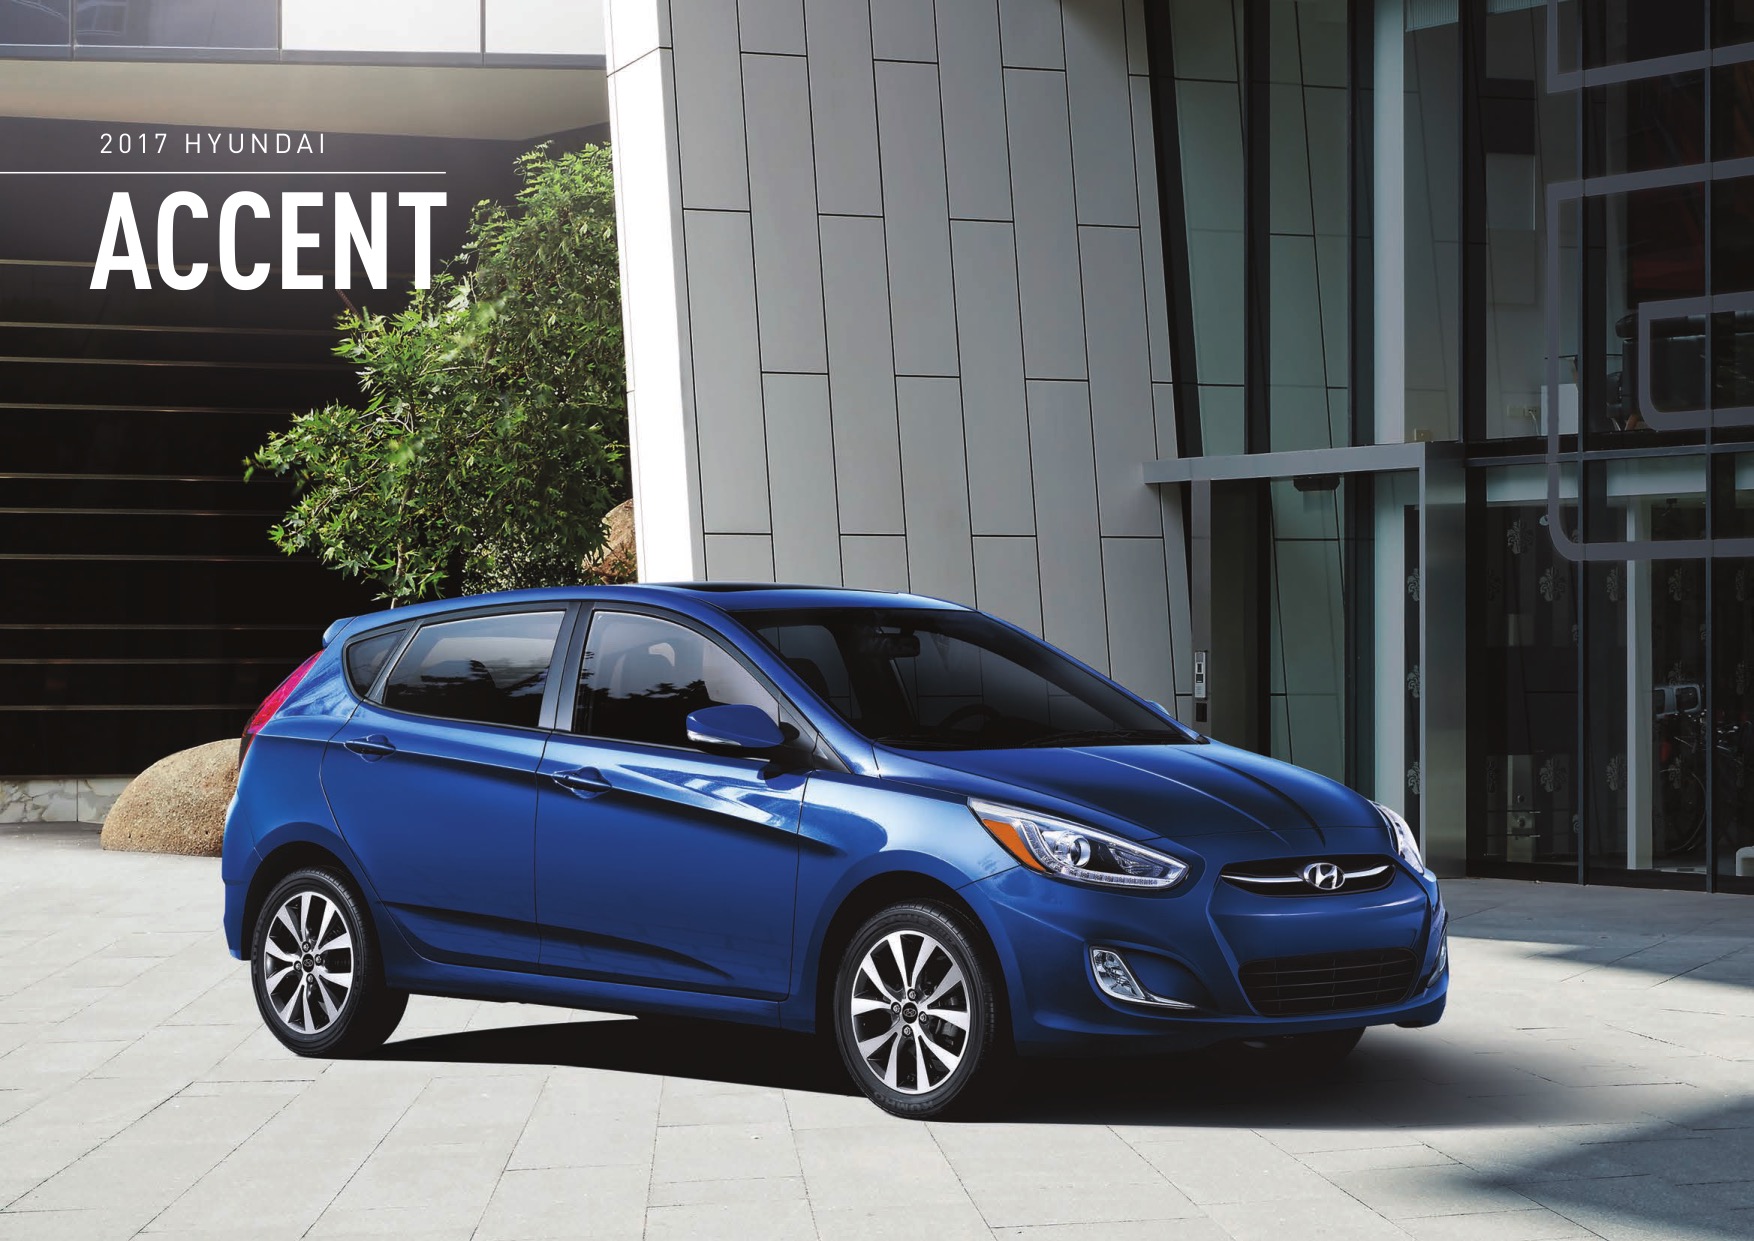 2017 Hyundai Accent Brochure Page 6